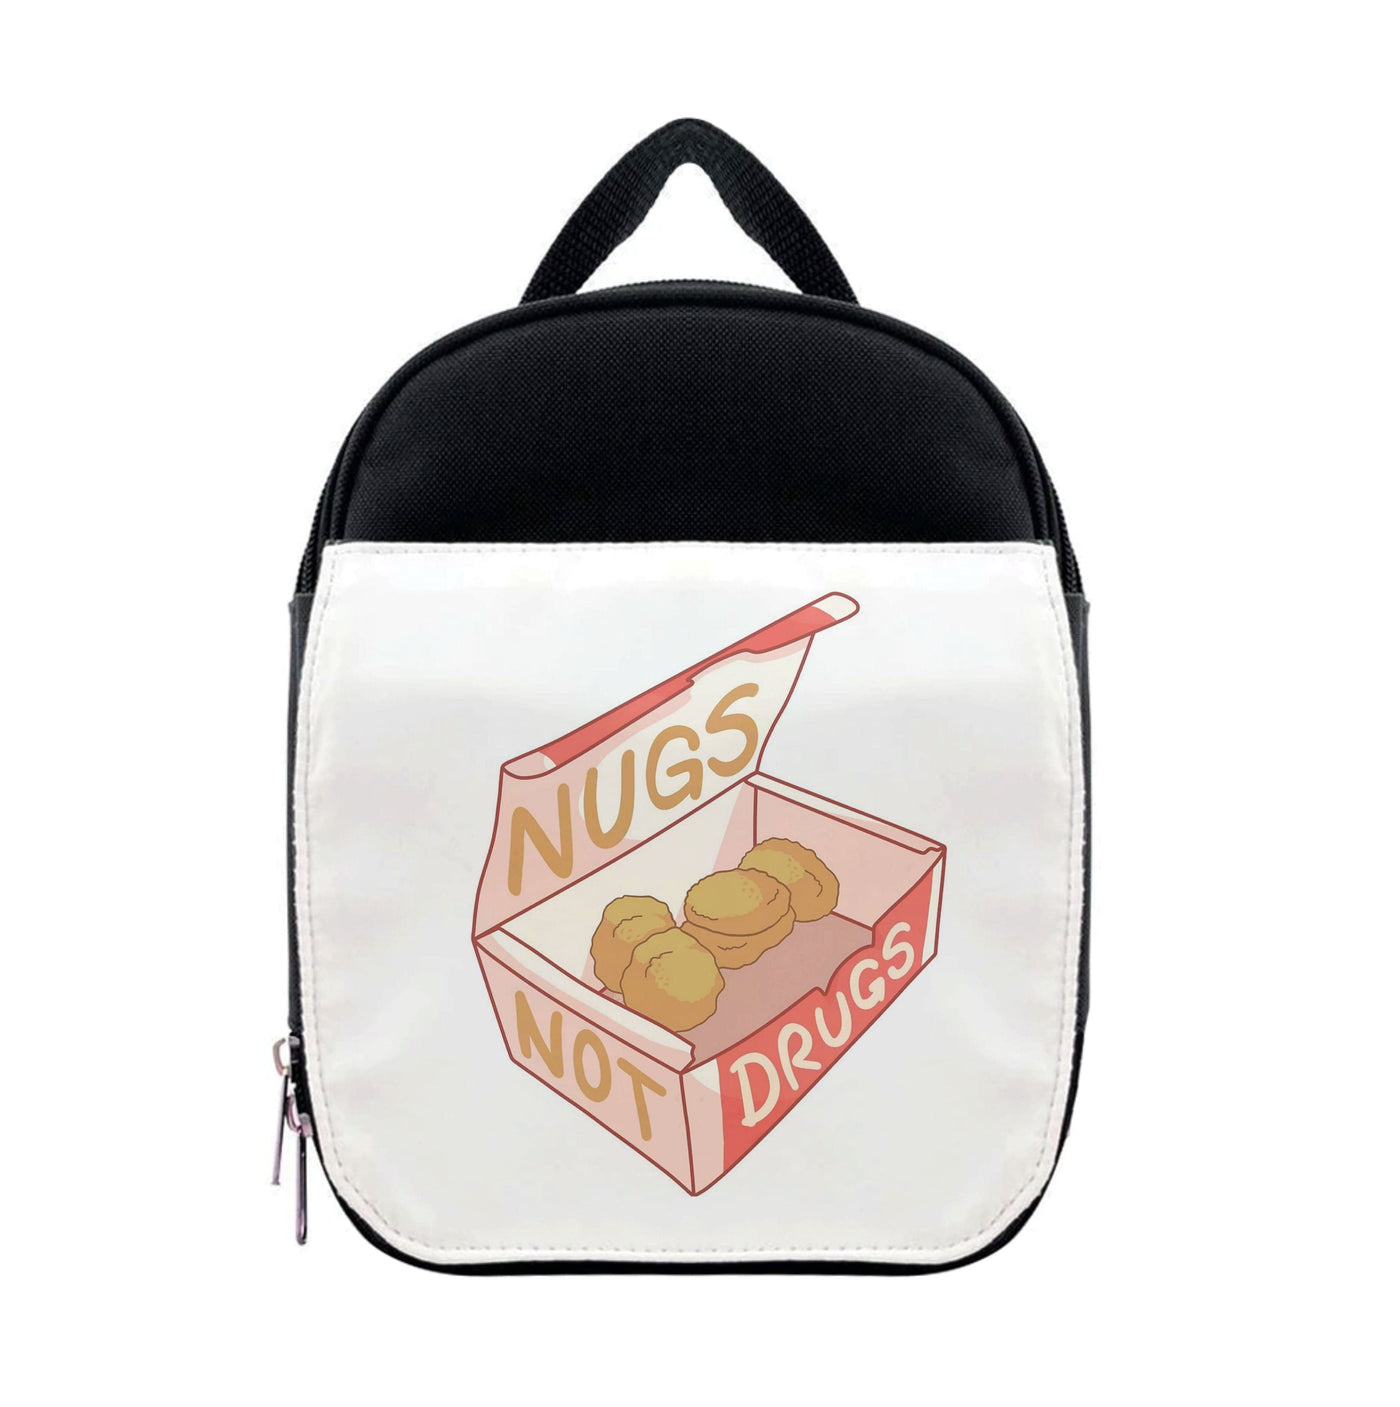 Nugs not Drugs Tumblr Style Lunchbox